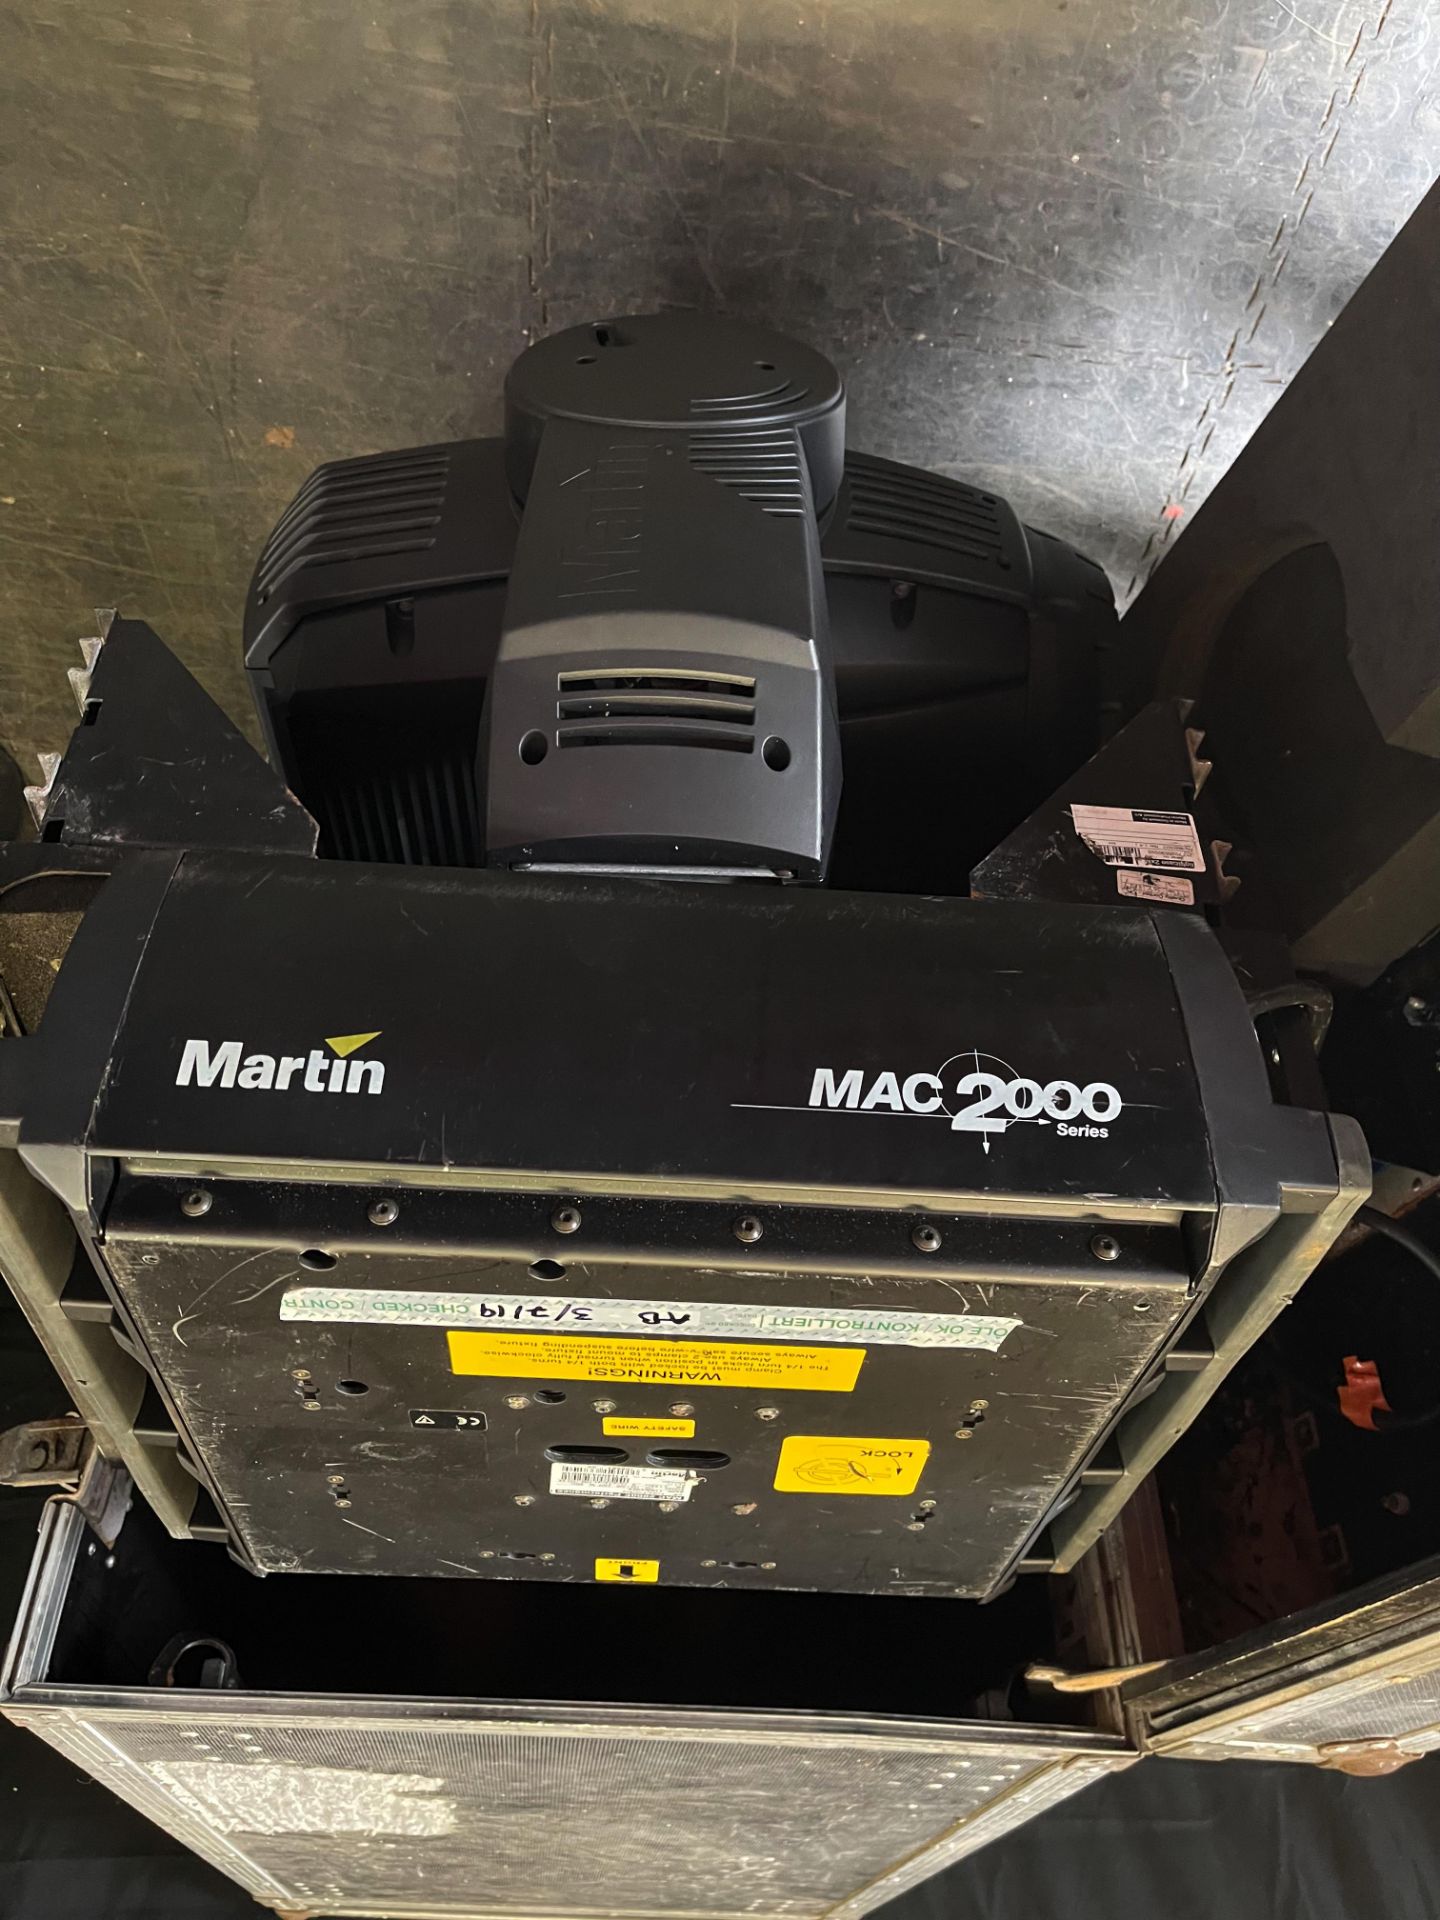 A Pair of Martin Mac 2000 Performance Moving Head Lights, working, not tested, not recently used - Image 2 of 3